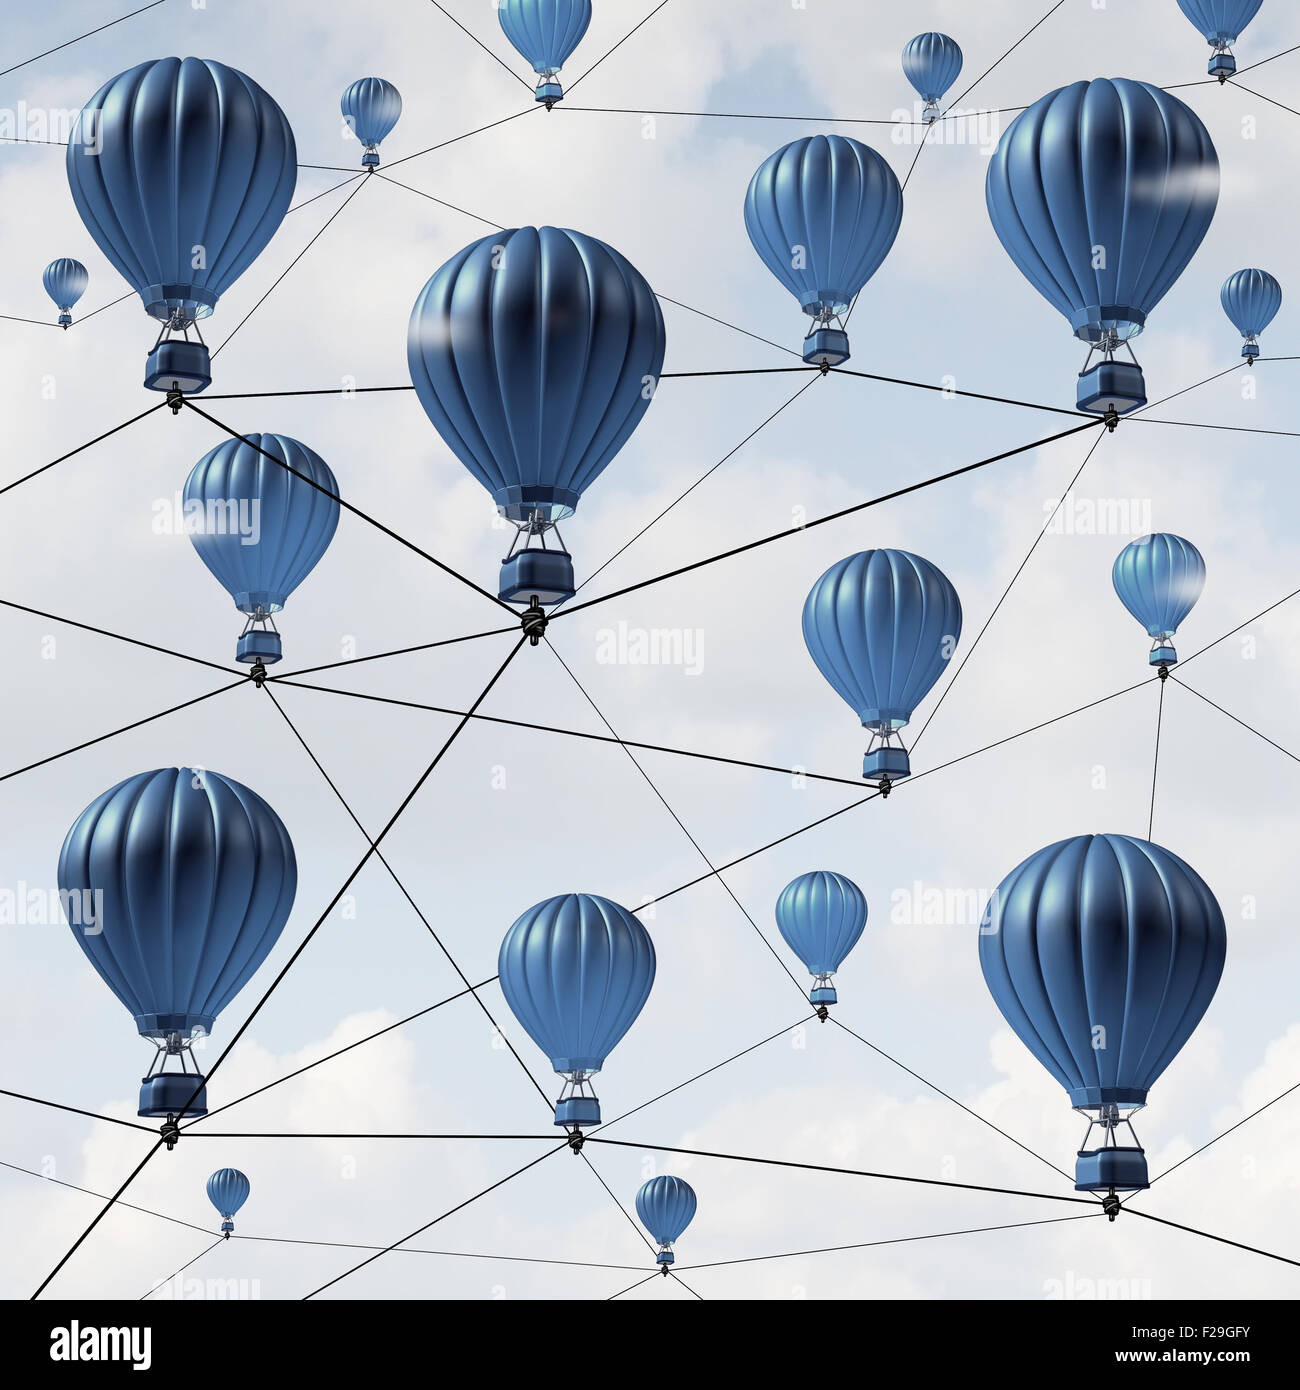 Network connection success concept and community social media links as a group of blue hot air balloons connected together in a Stock Photo